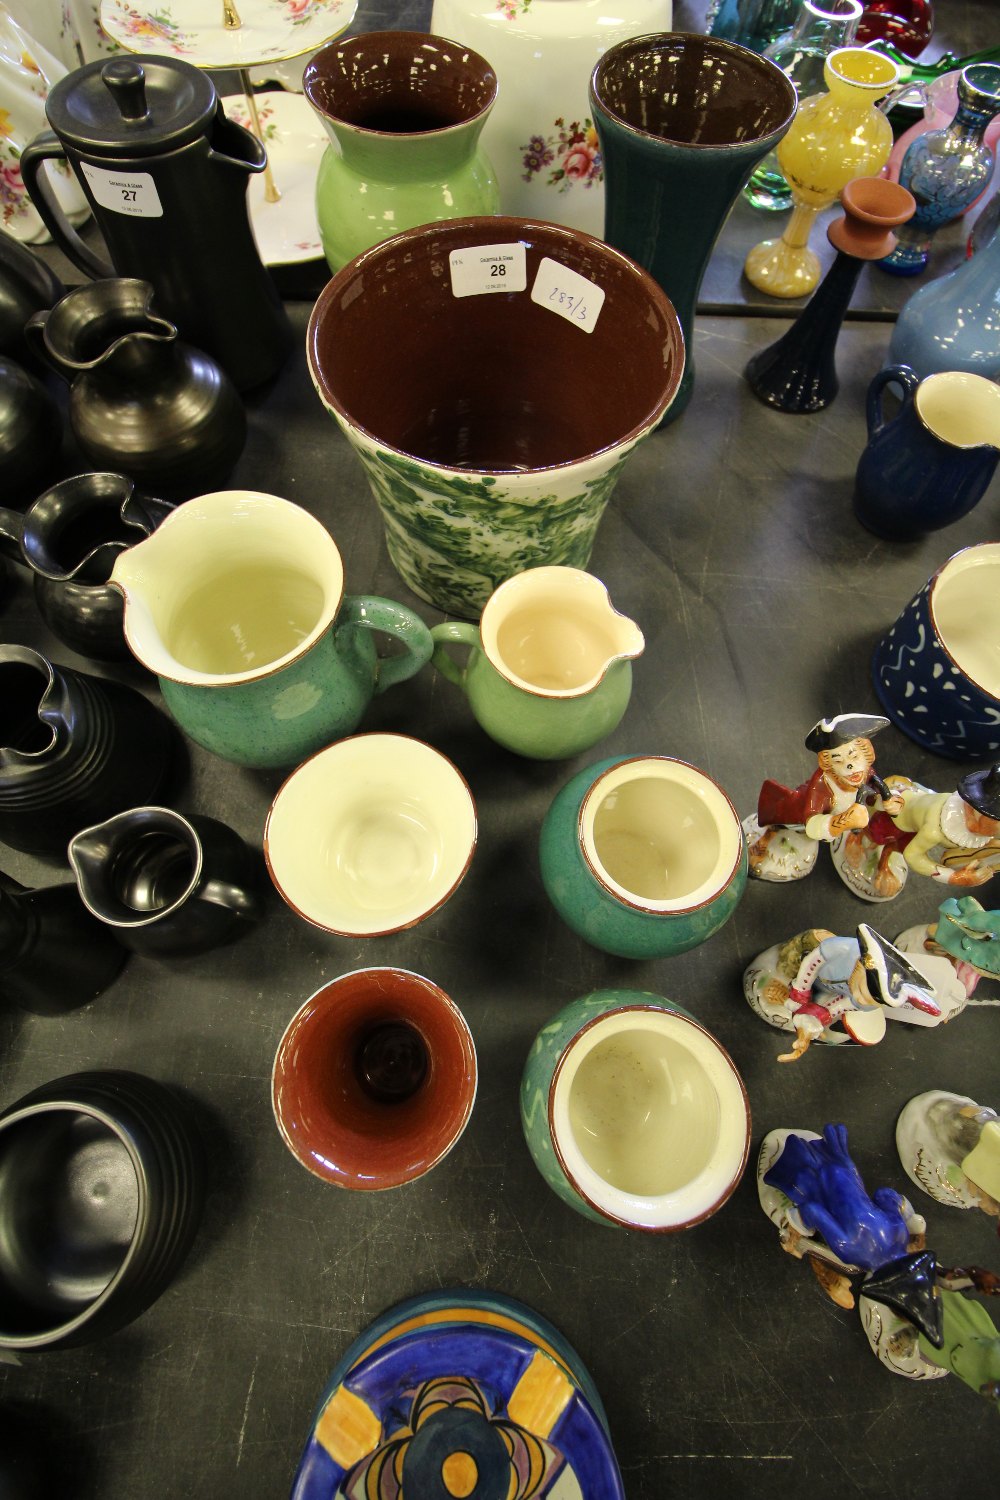 Quantity of Wetheriggs pottery wares - green slip etc - Image 2 of 2